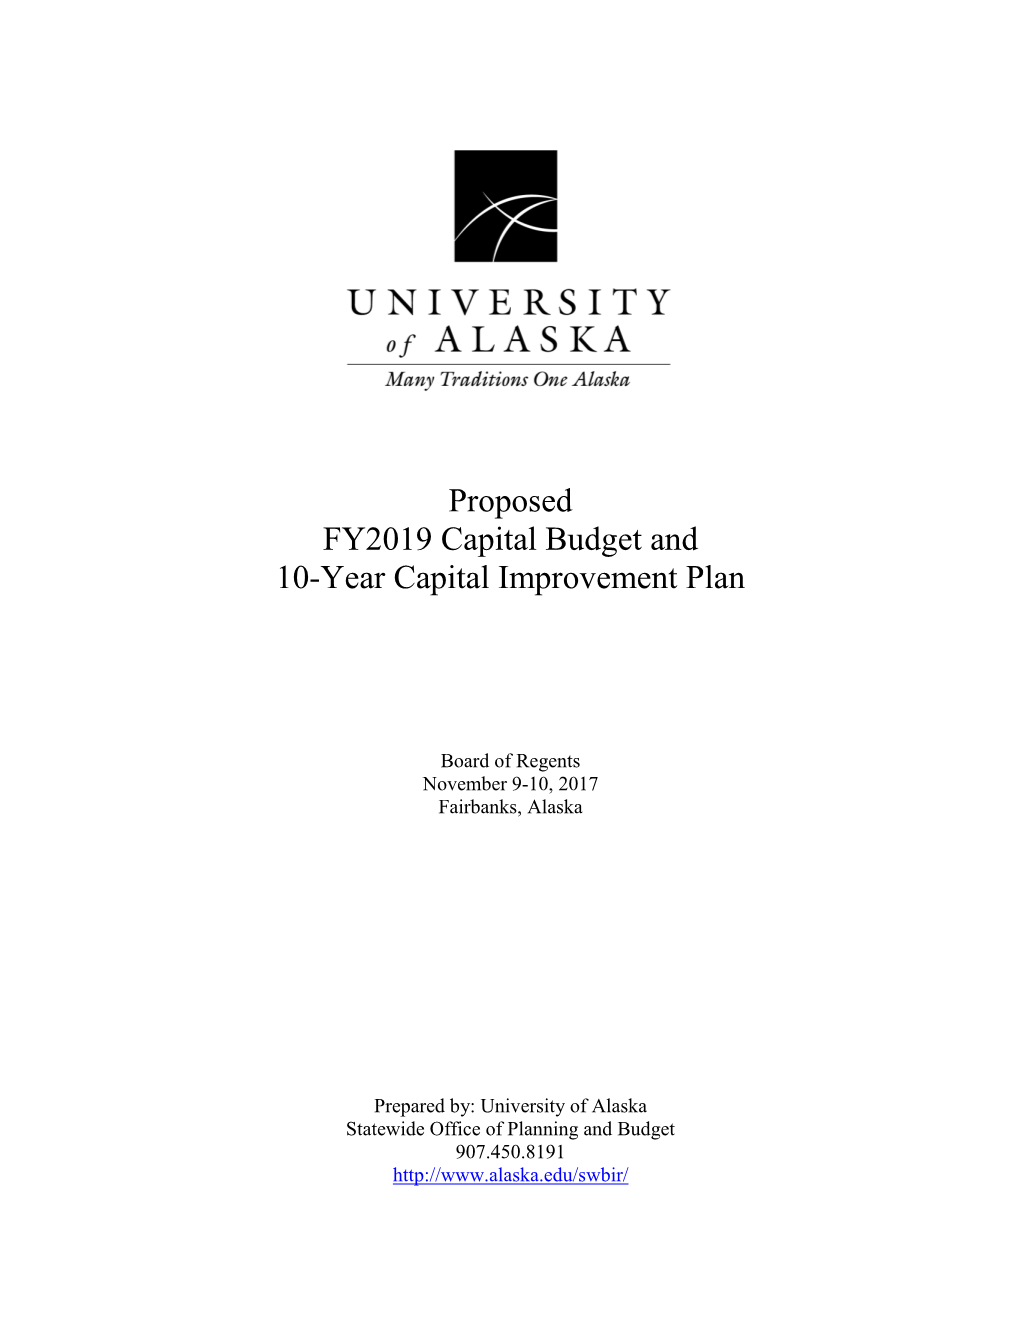 Proposed FY2019 Capital Budget and 10-Year Capital Improvement Plan